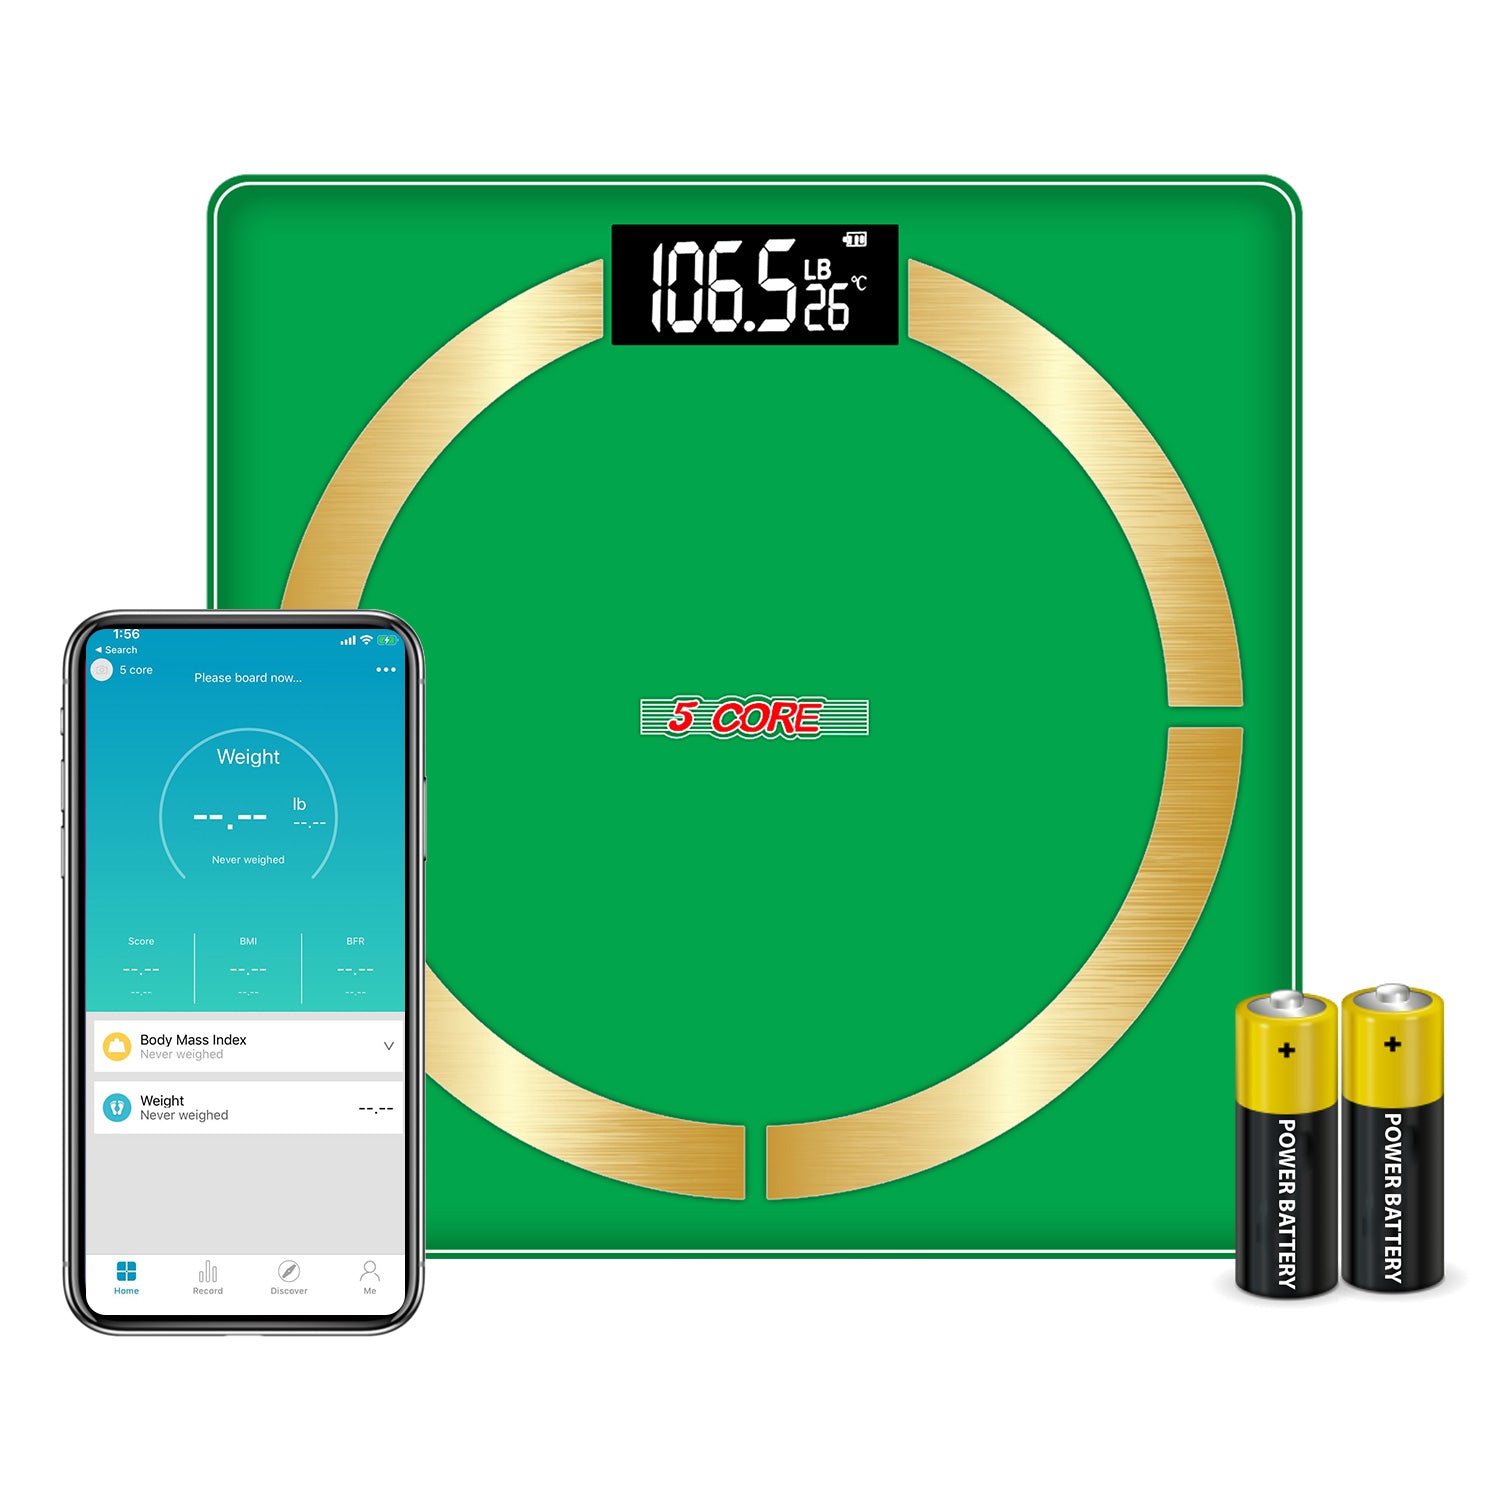 5 Core Smart Weight Scale for Body Weight Digital Bathroom Scale BMI Weighing Bluetooth Body Fat Monitor Health Analyzer Sync with App -BBS 03 B SG